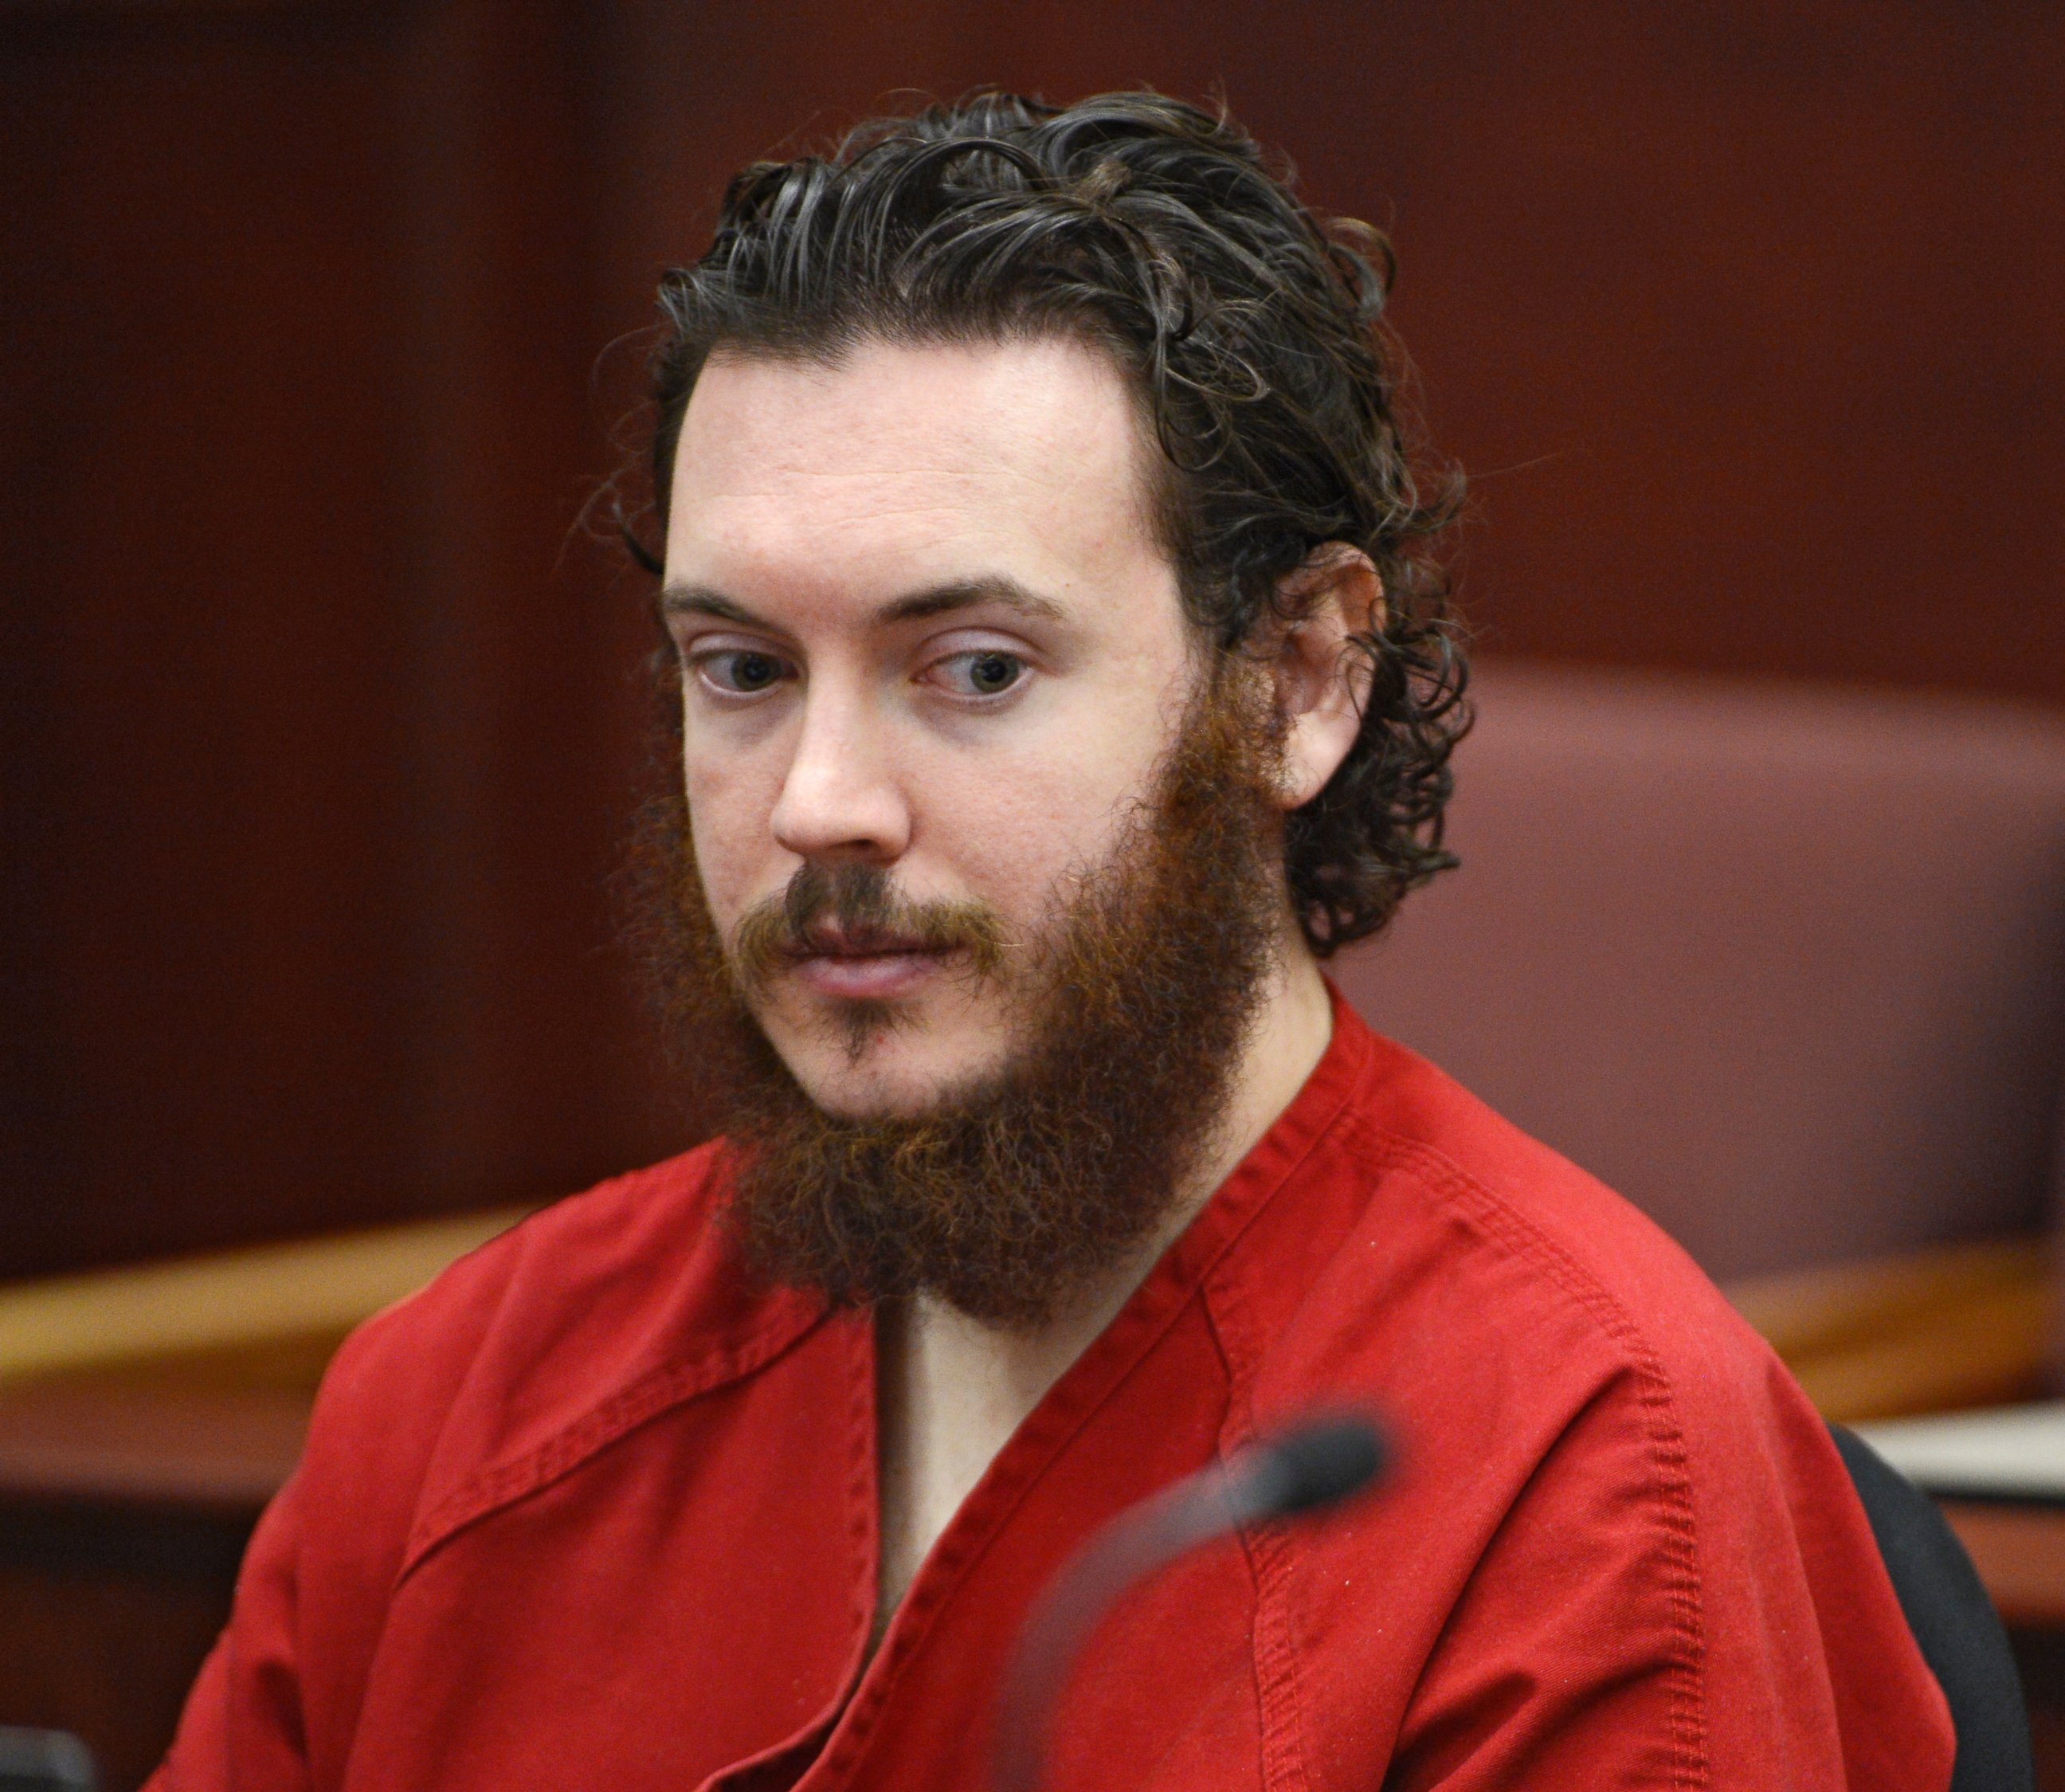 PHOTO: James Holmes is pictured in court in Centennial, Colo. on June 4, 2013. 